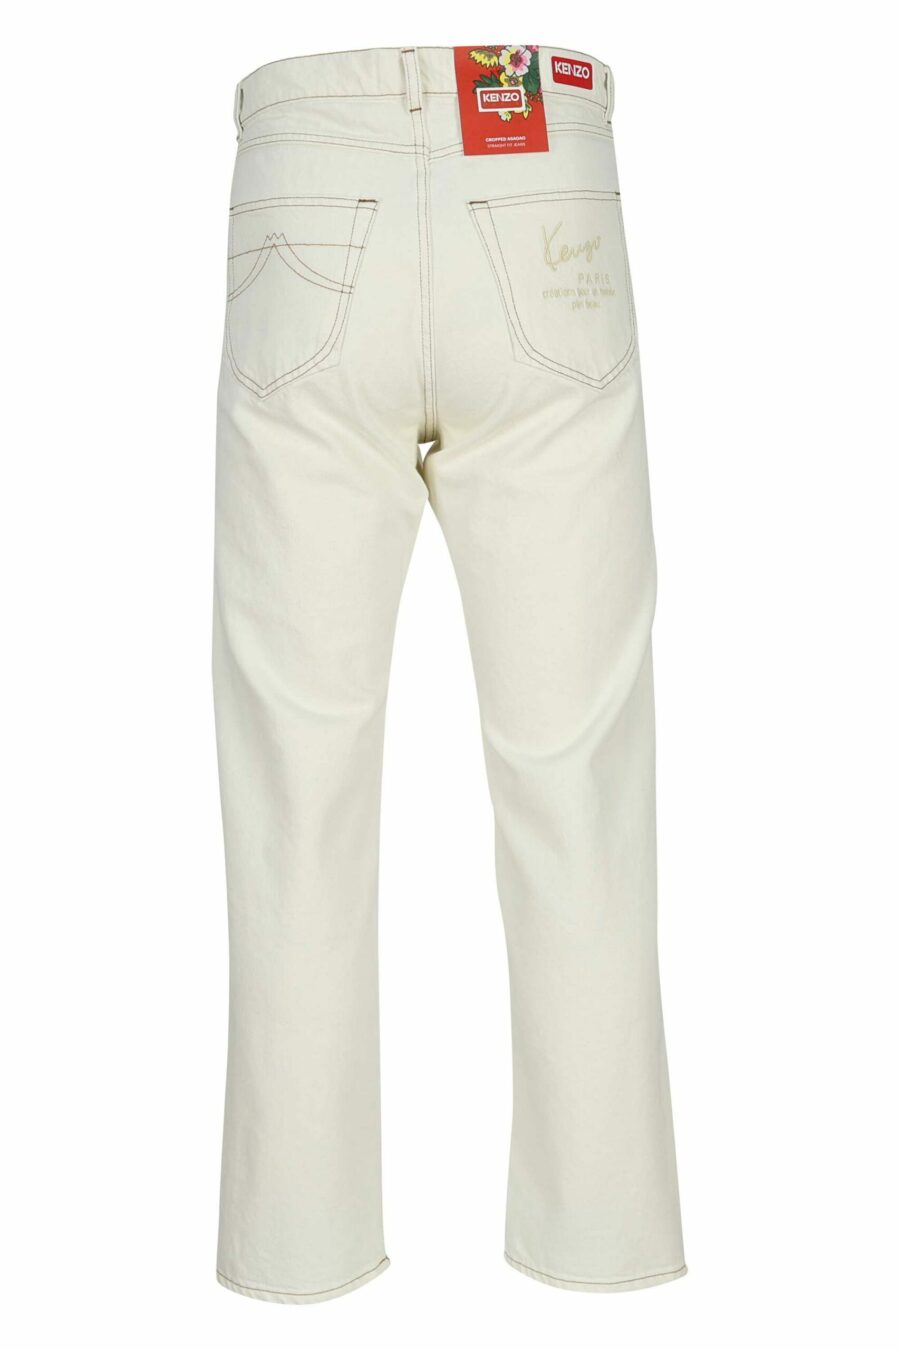 White denim trousers with "k" logo - 3612230591813 2 scaled